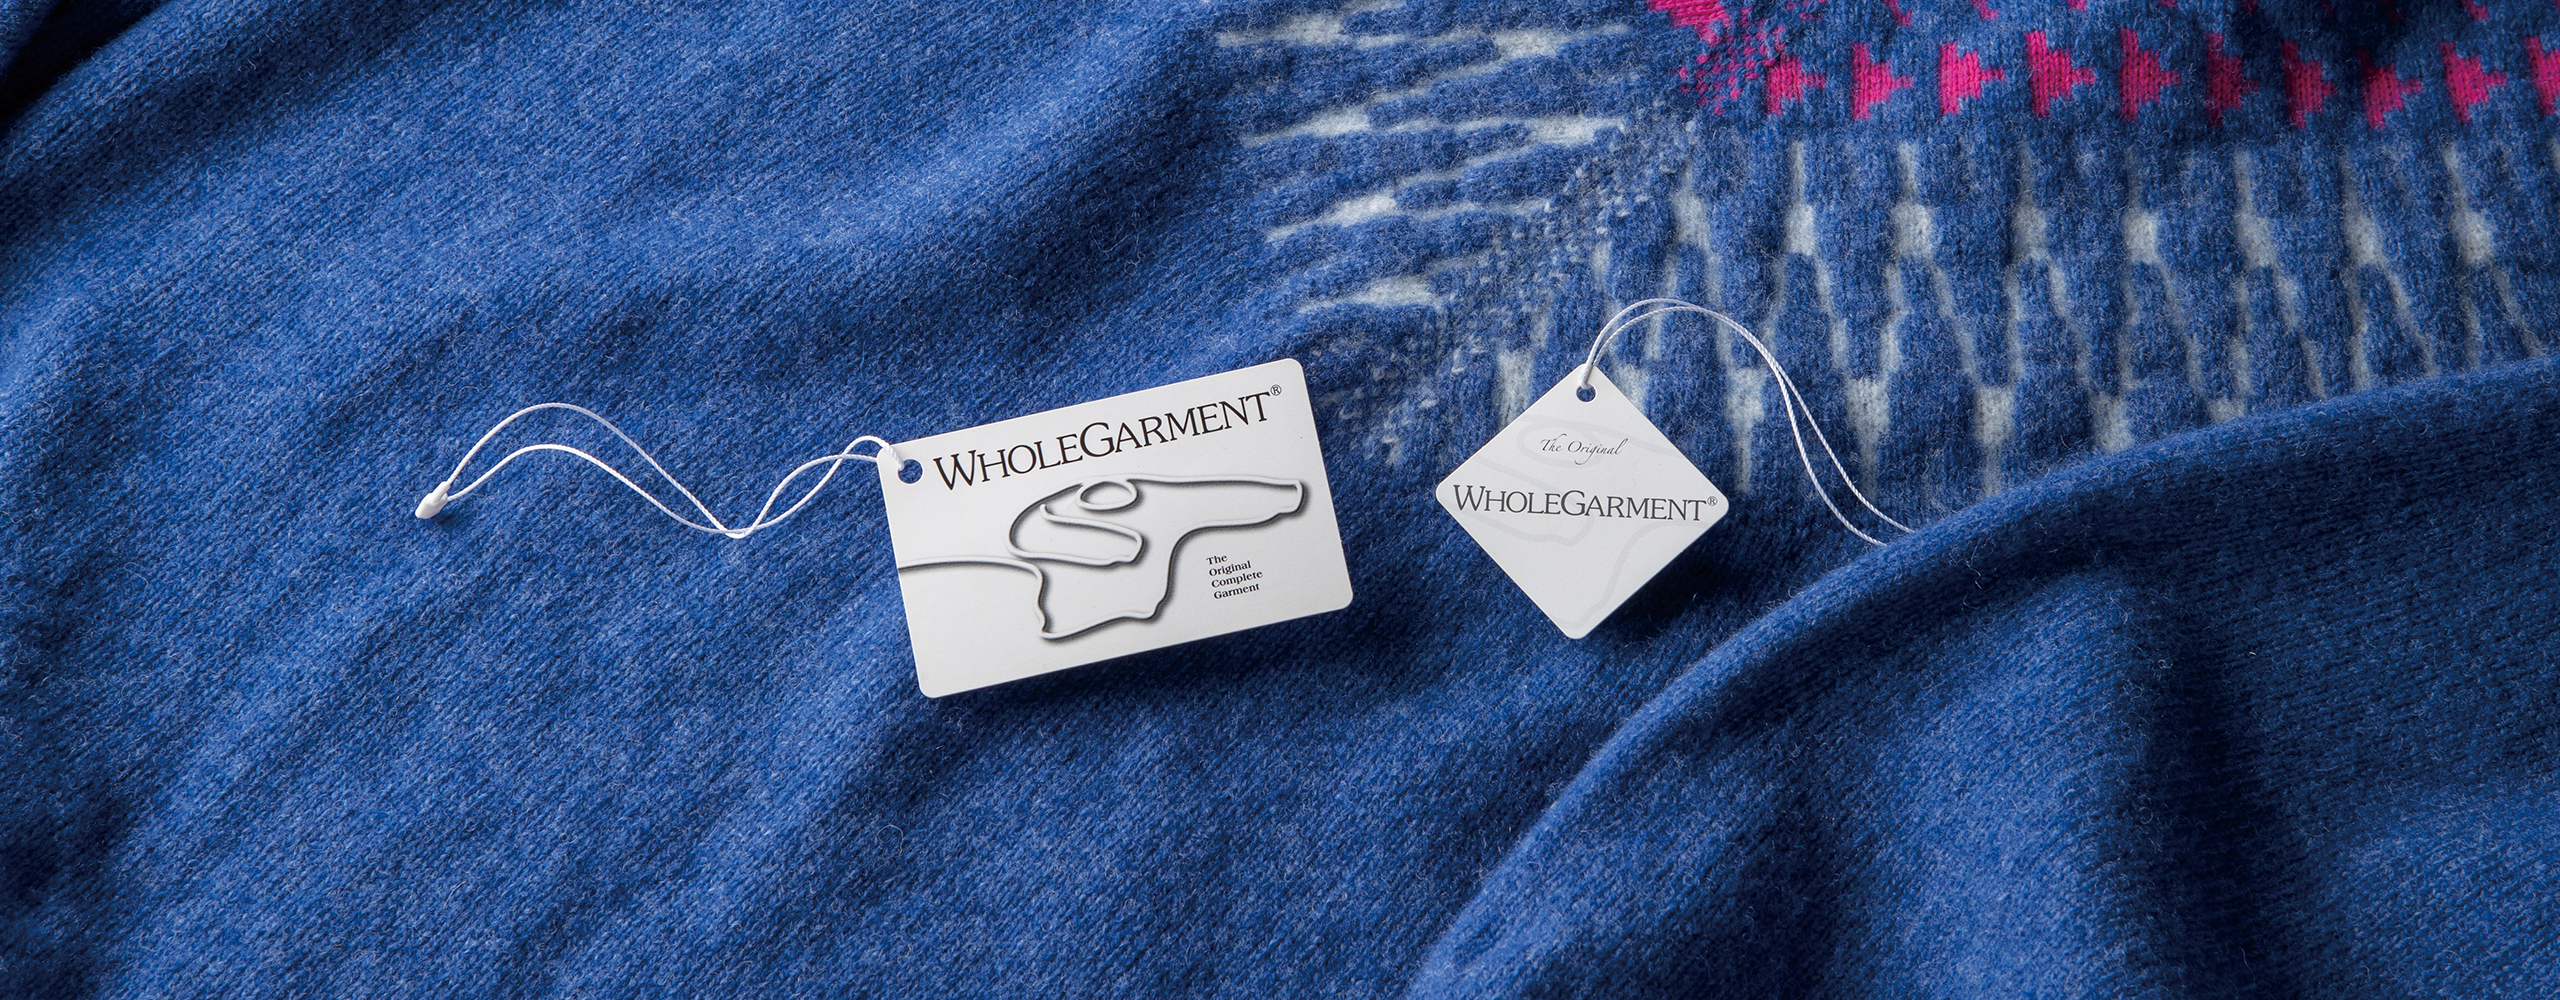 WHOLEGARMENT Product Tags